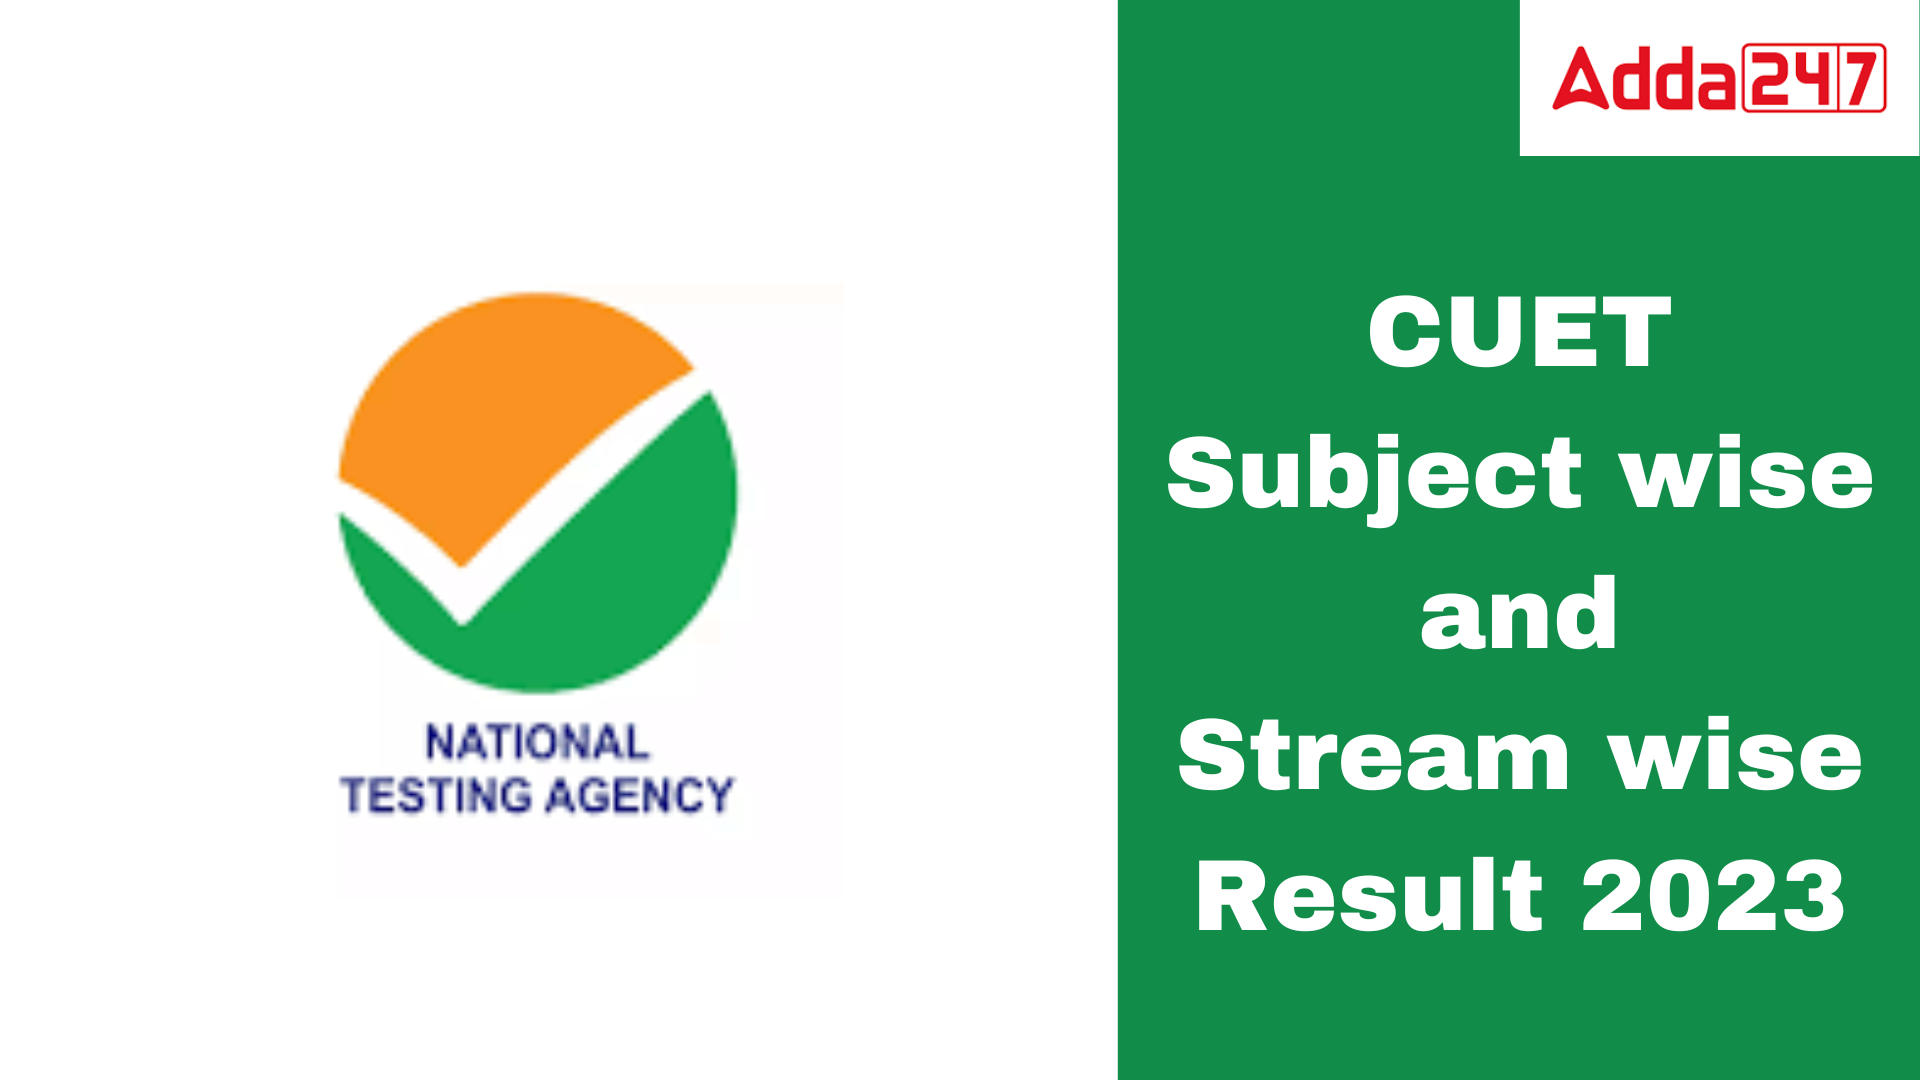 CUET Subject wise and Stream wise Result 2023